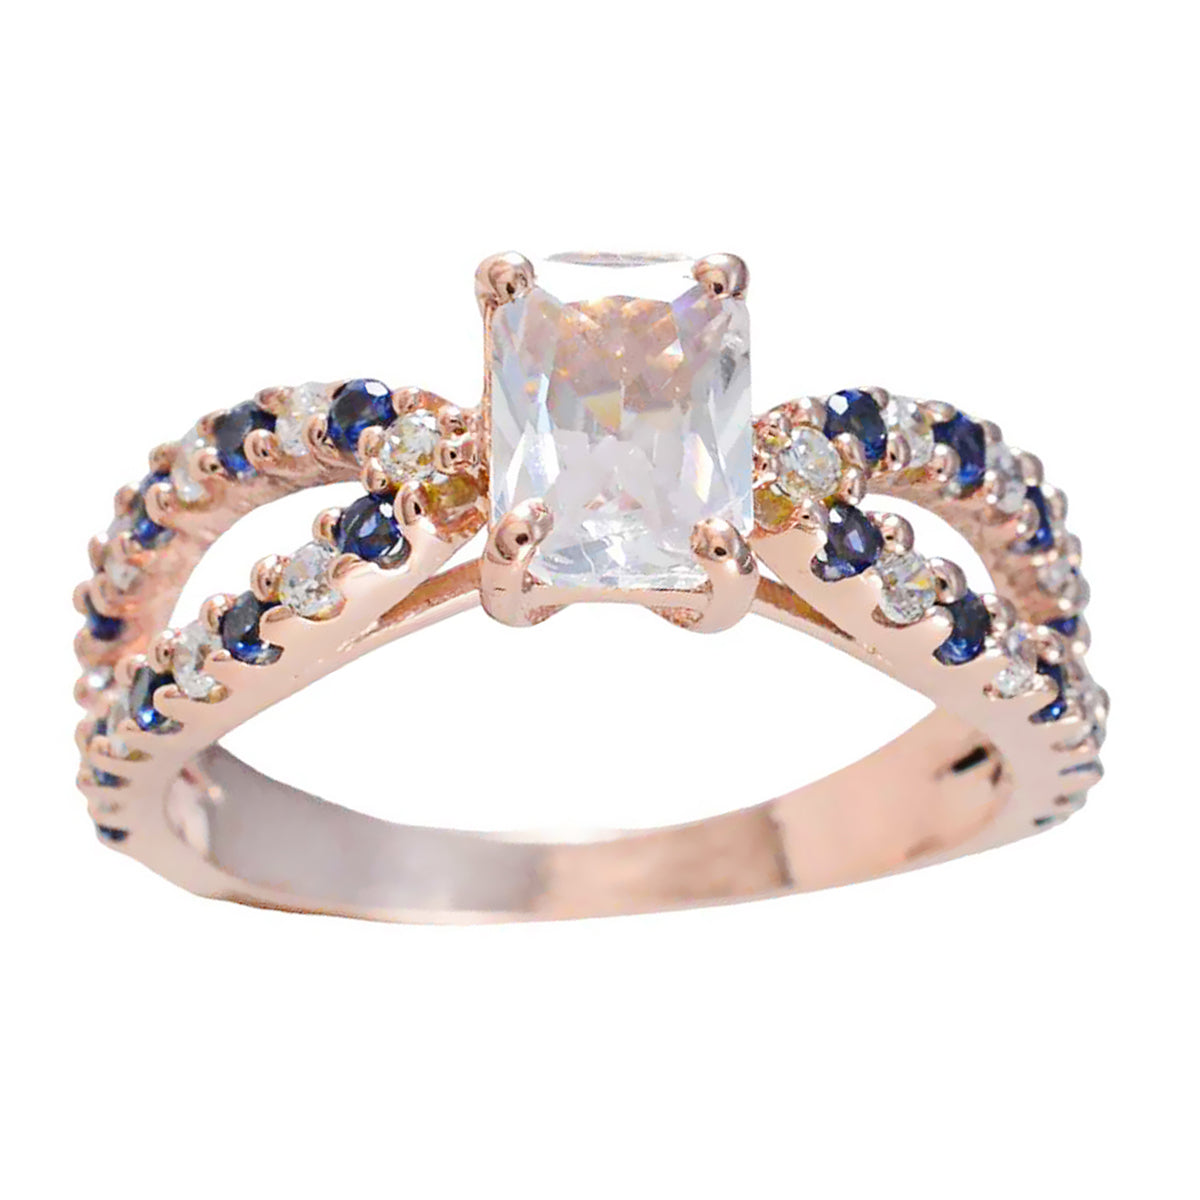 Riyo Total Silver Ring With Rose Gold Plating Blue Sapphire CZ Stone Octagon Shape Prong Setting  Jewelry Graduation Ring